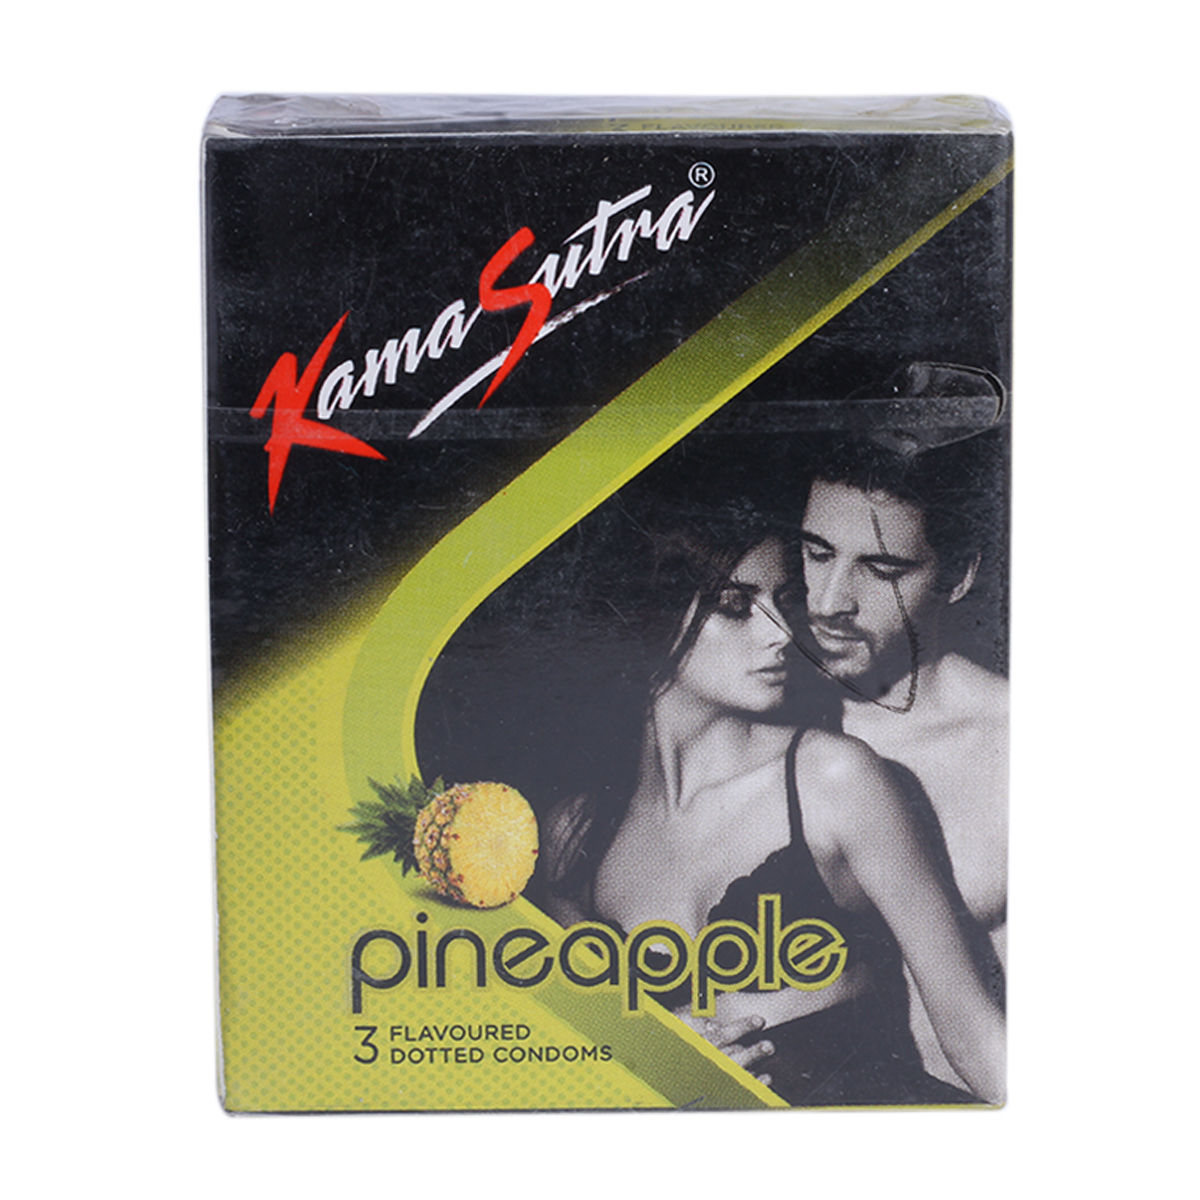 Buy Kamasutra Pineapple Flavoured Dotted Condoms, 3 Count Online